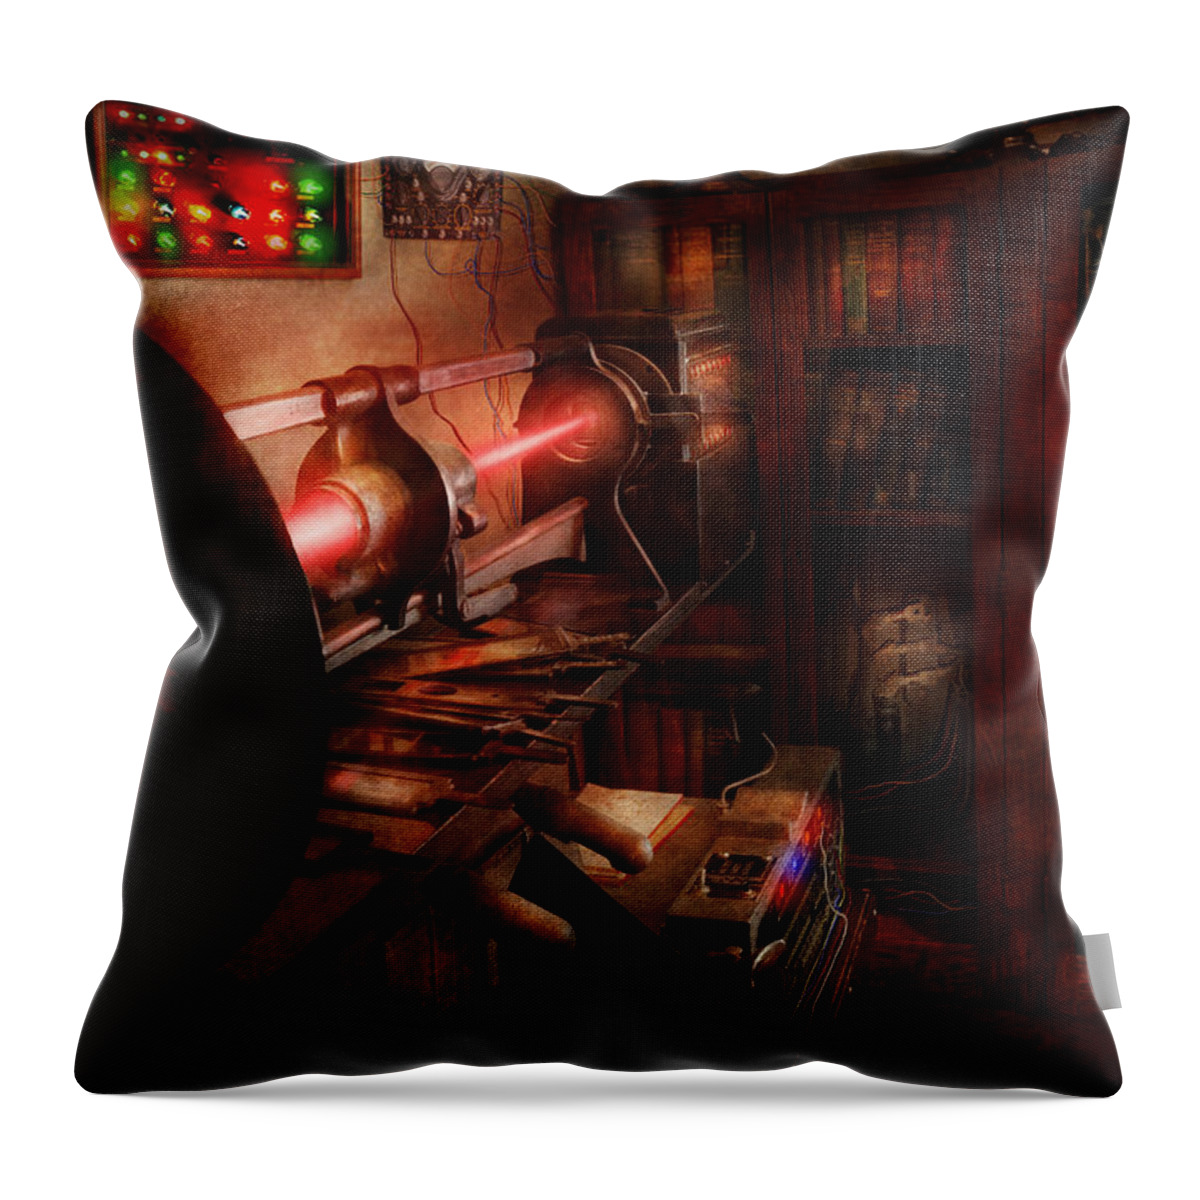 Cyberpunk Throw Pillow featuring the photograph Steampunk - Photonic Experimentation by Mike Savad